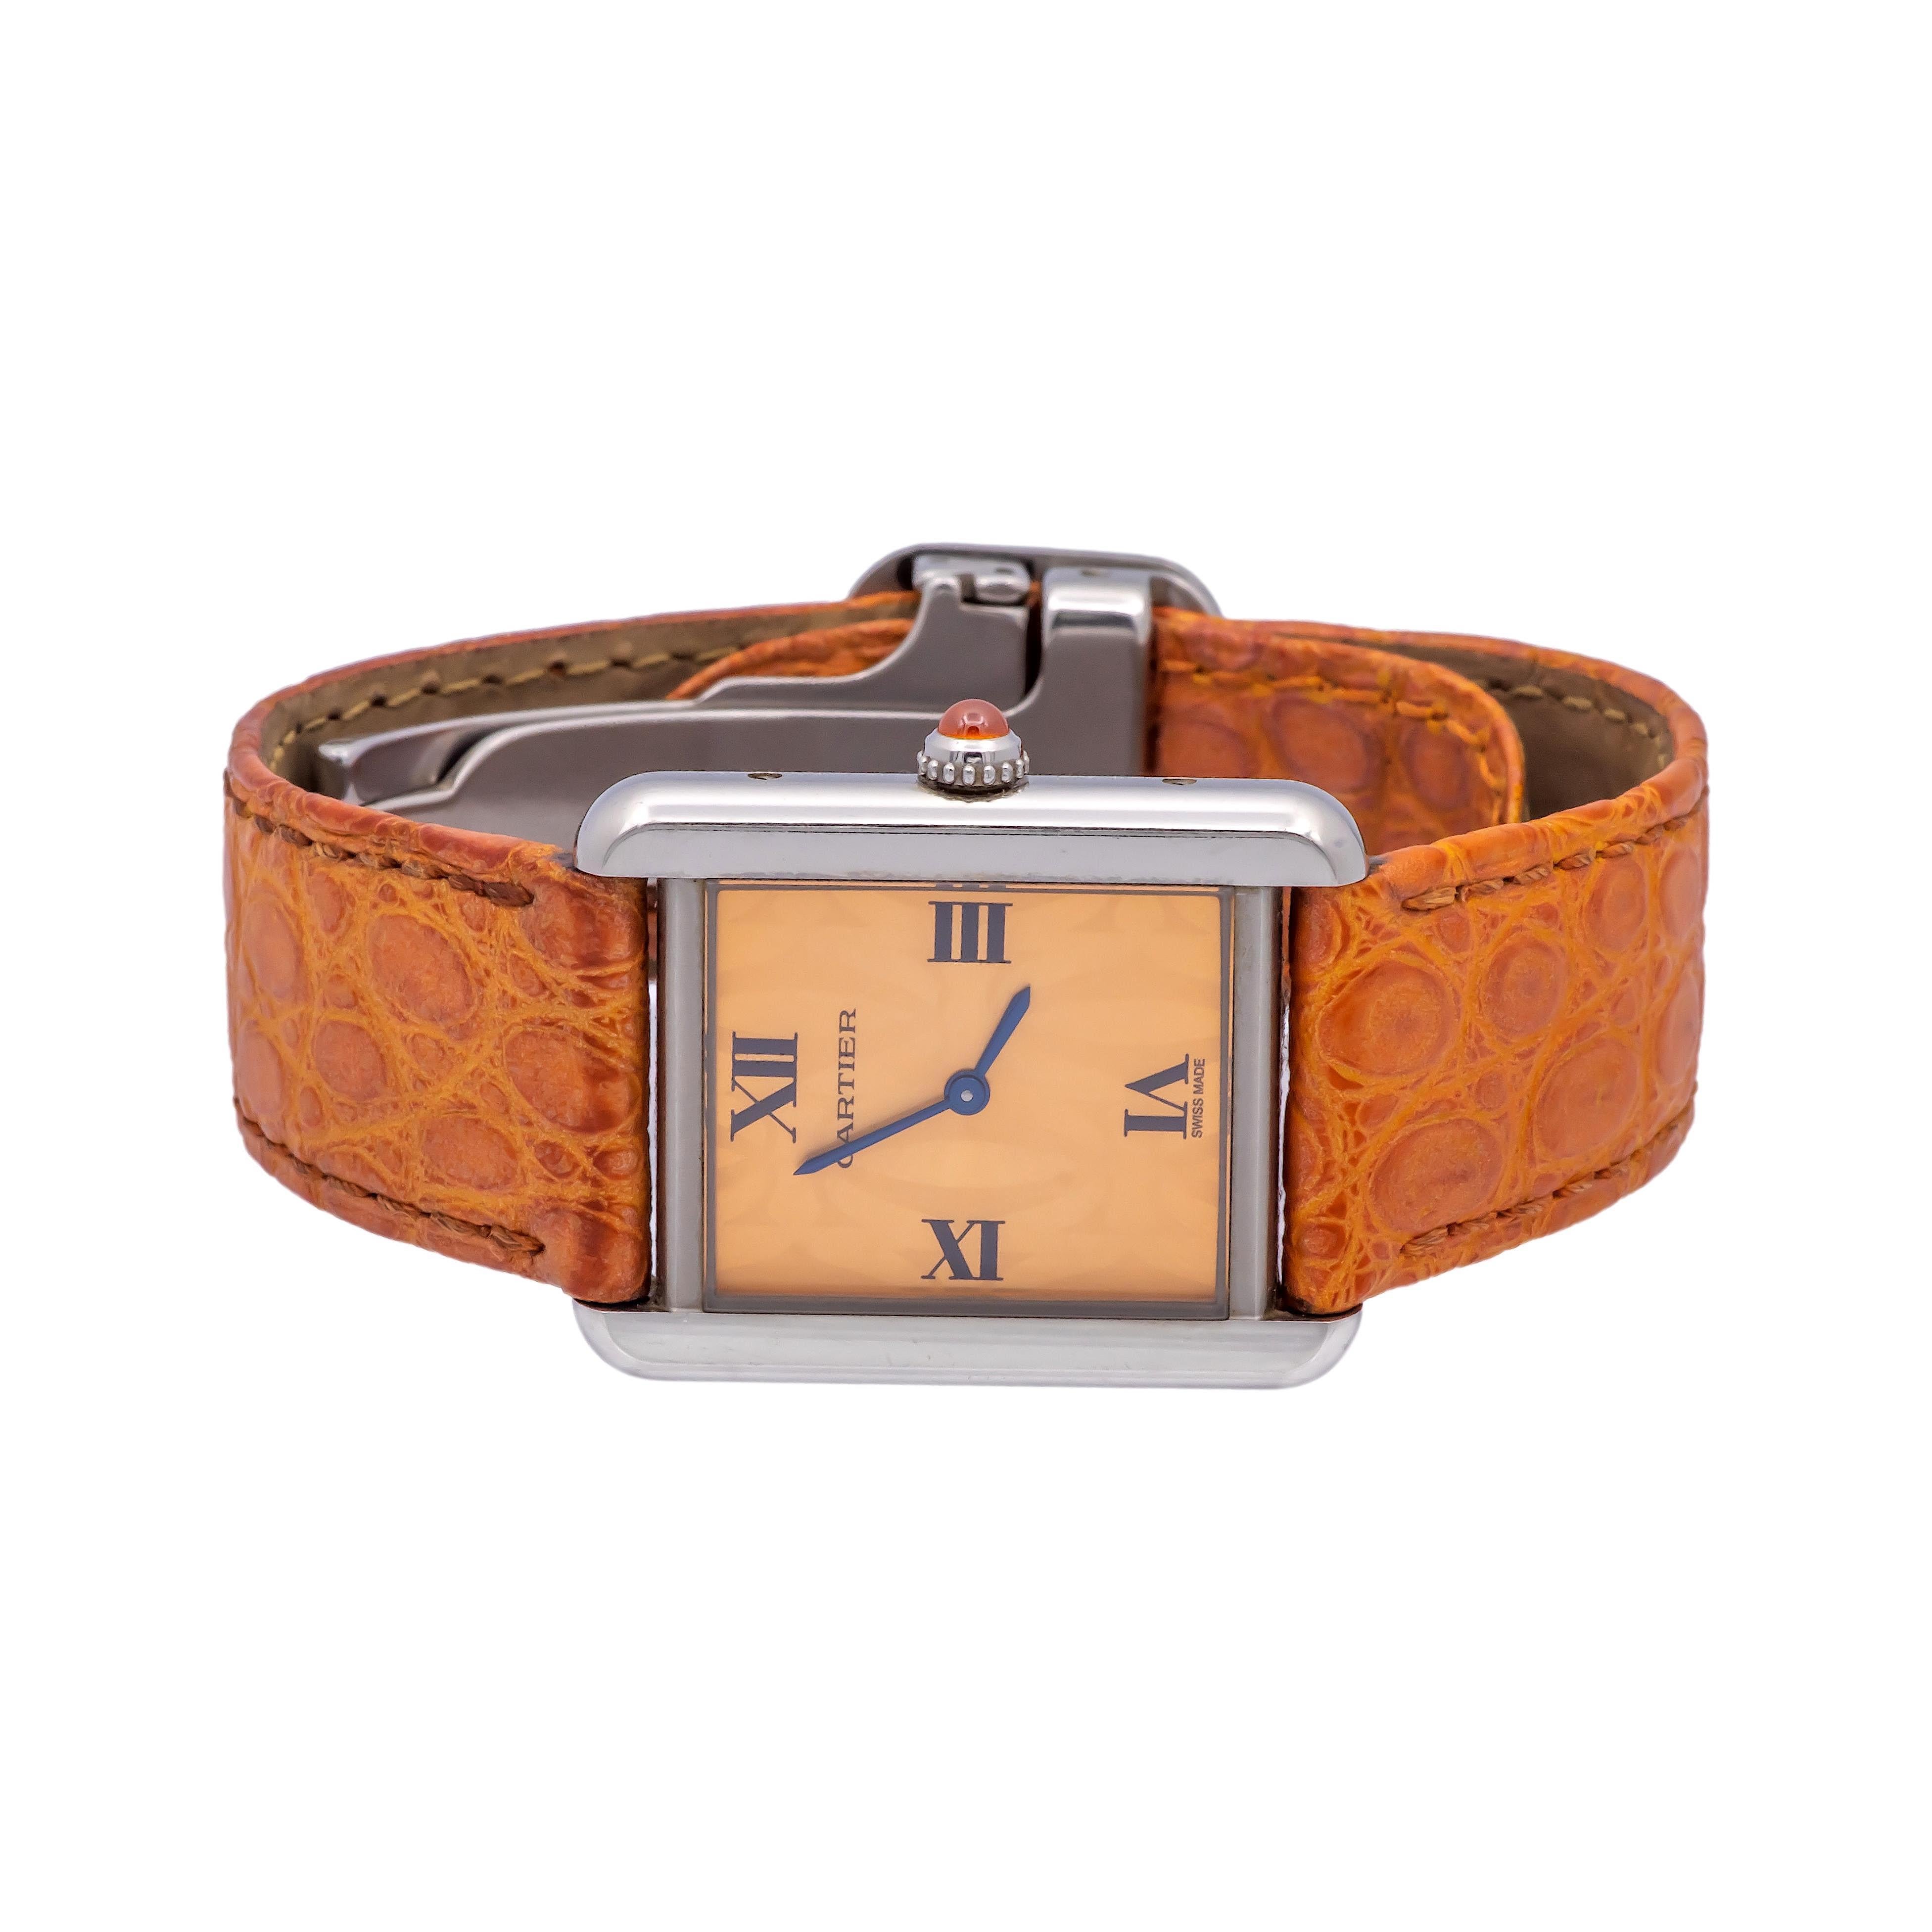 Pre-Owned Cartier limited edition watch from the Tank Solo collection with model number 2716 featuring a stainless steel frame with an orange logo dial, roman numeral markers and matching orange alligator strap. This watch is powered by a quartz